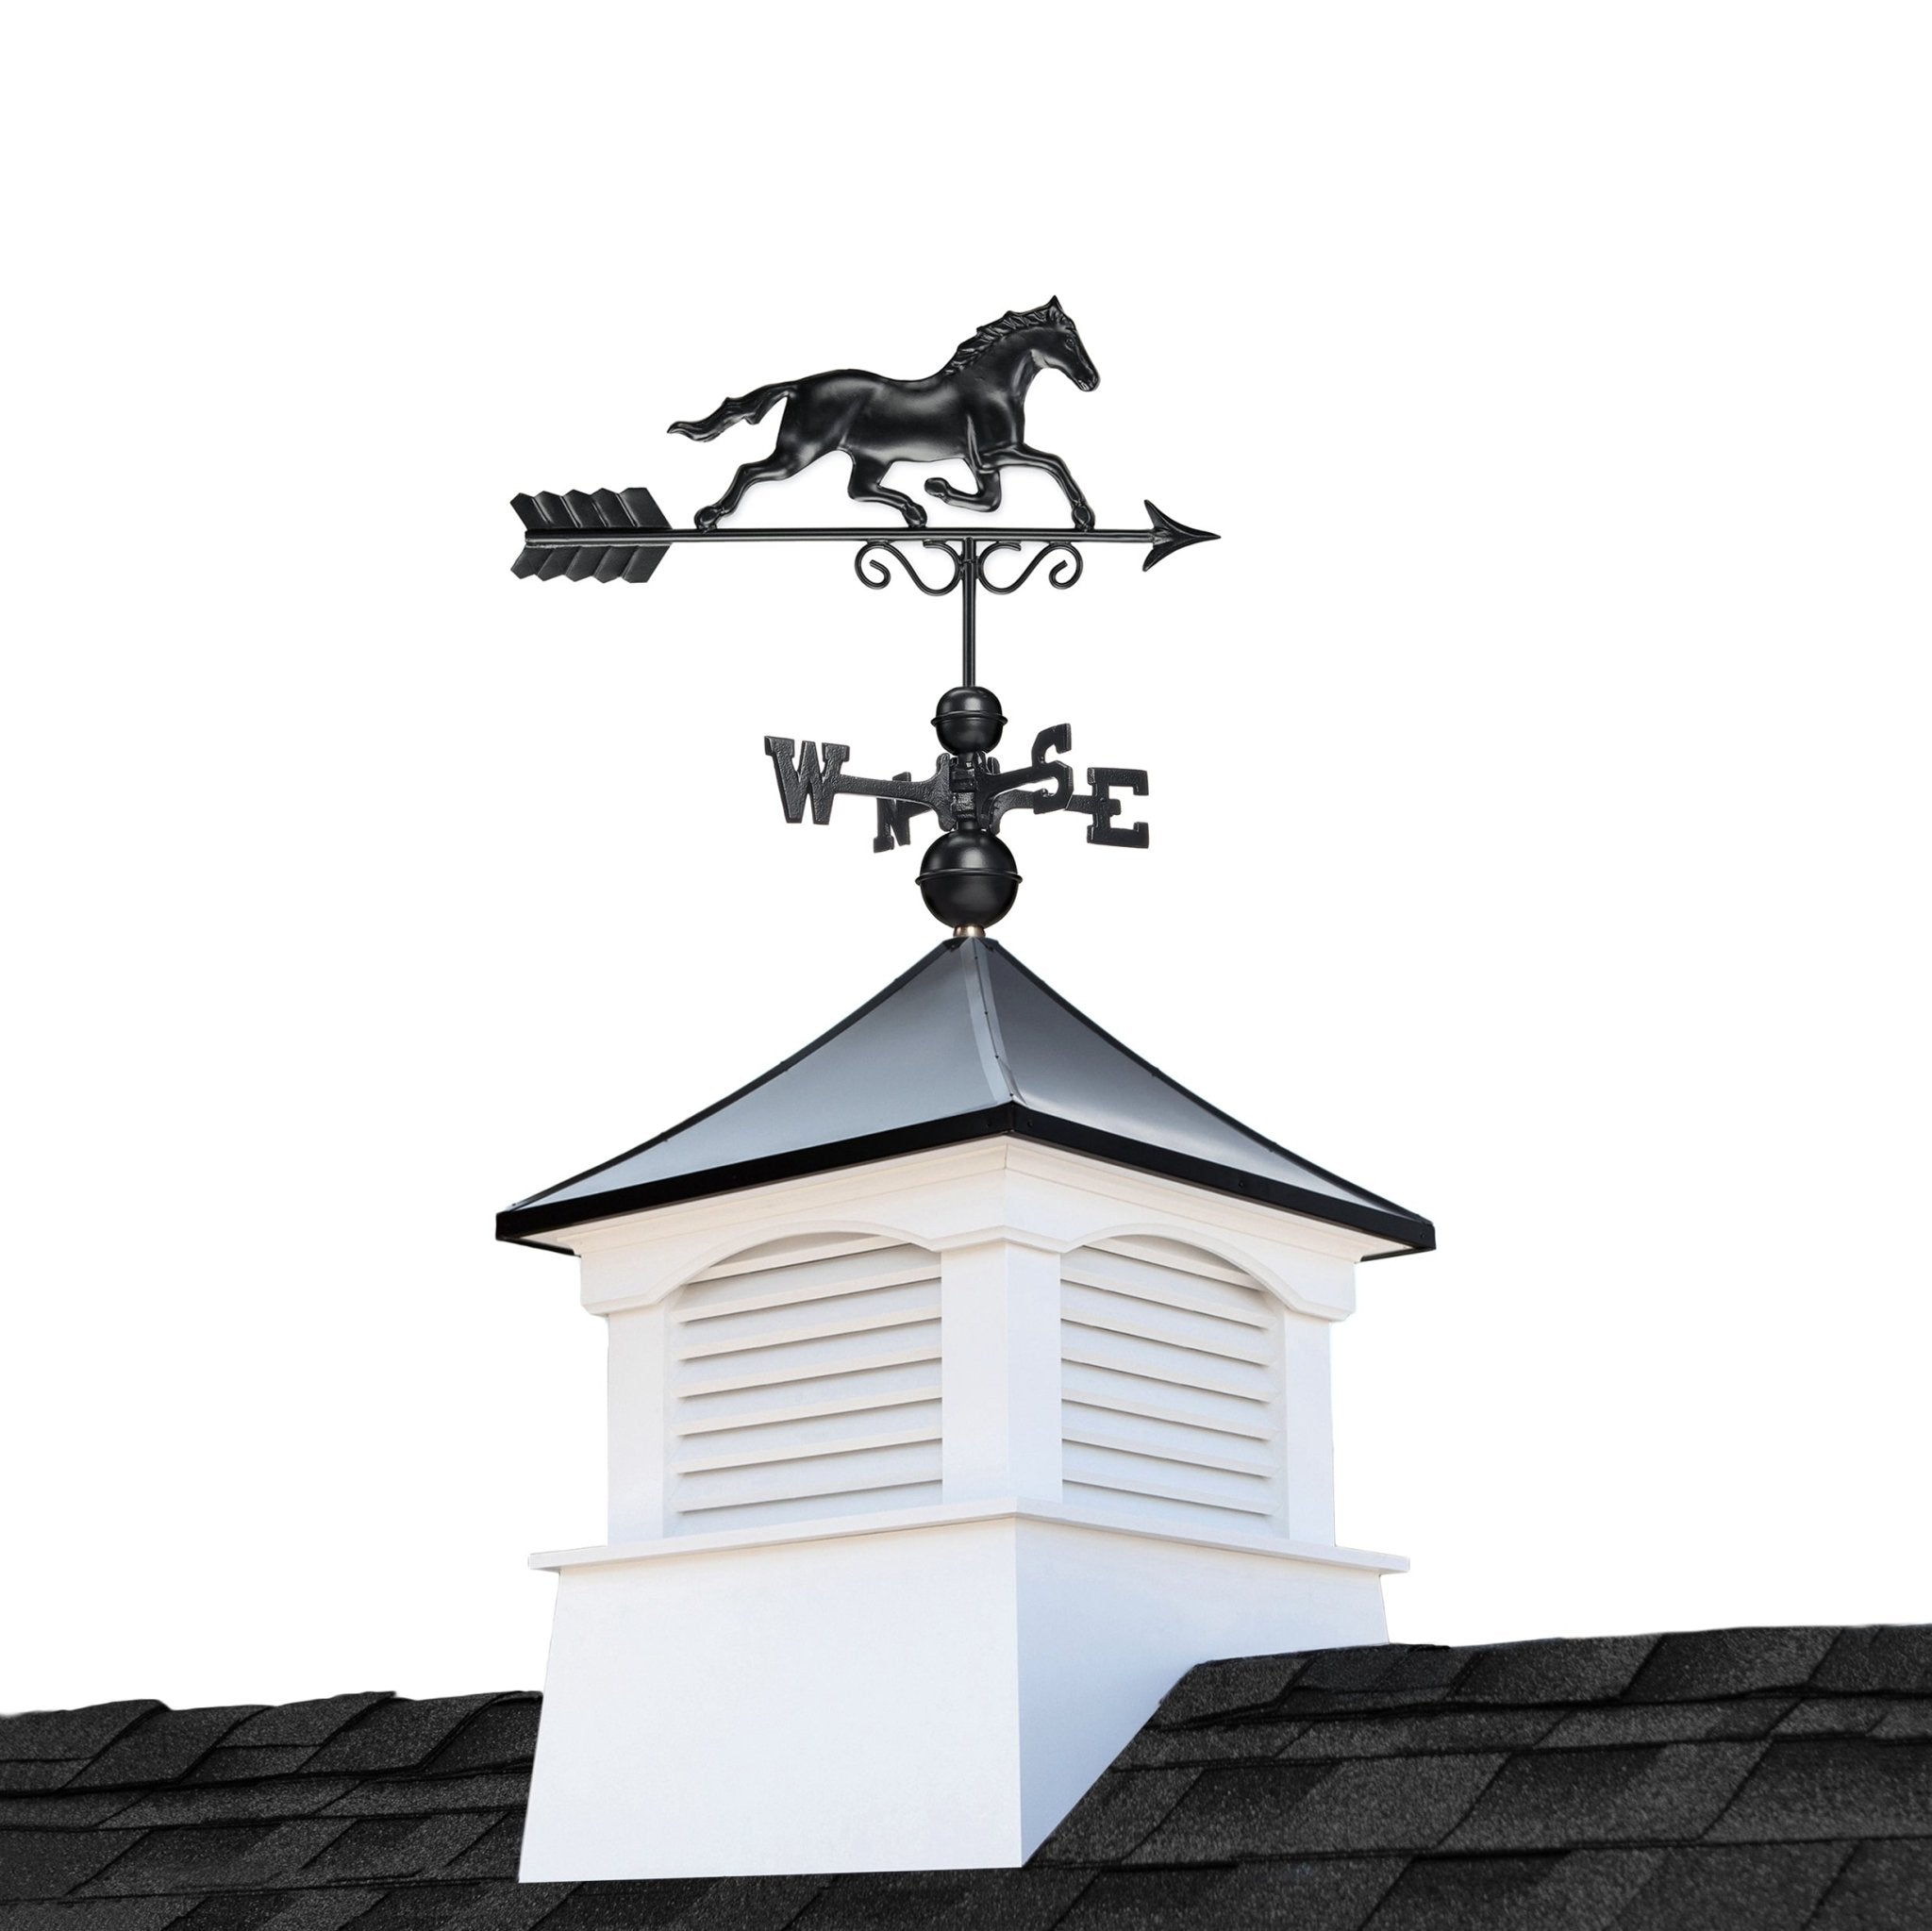 26" Square Coventry Vinyl Cupola with Black Aluminum roof and Black Aluminum Horse Weathervane - Good Directions